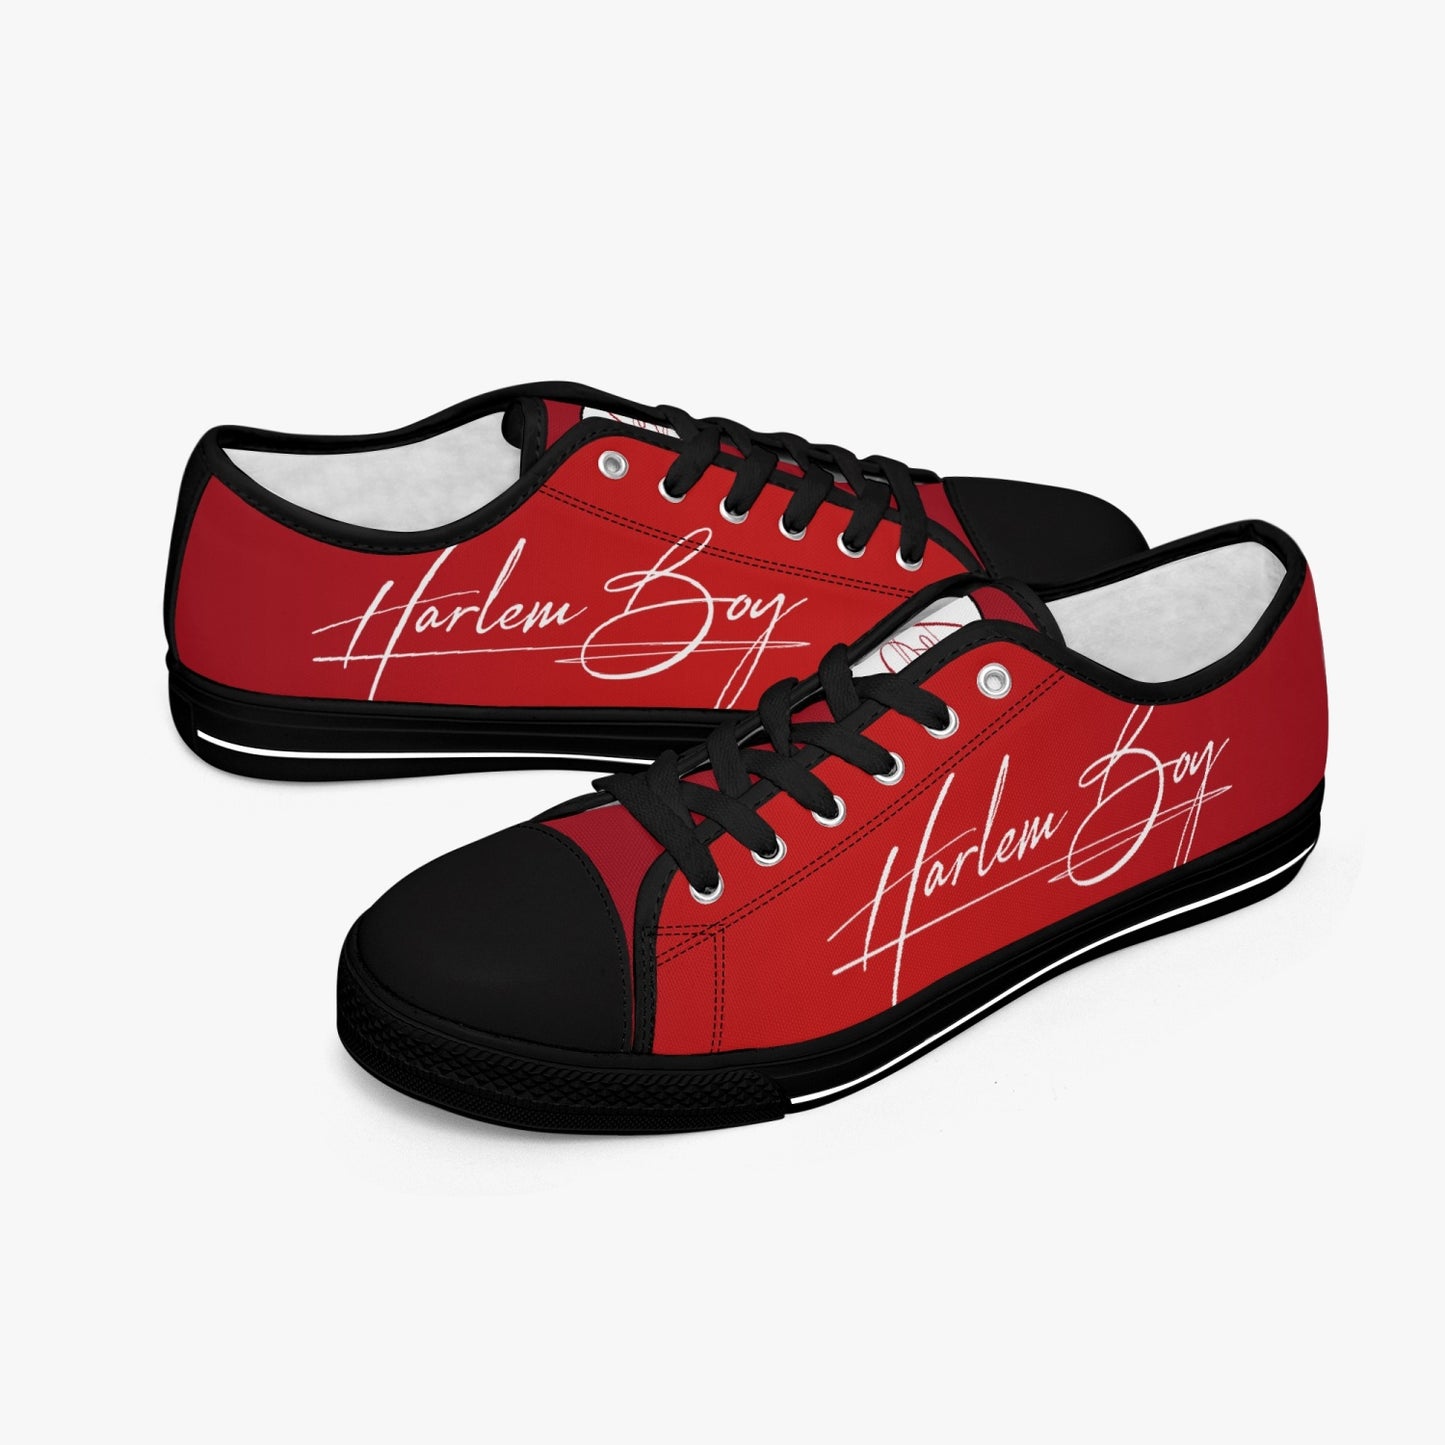 HB Harlem Boy "Lenox Ave" Classic Low Tops - Ruby - Men (Black or White Sole)